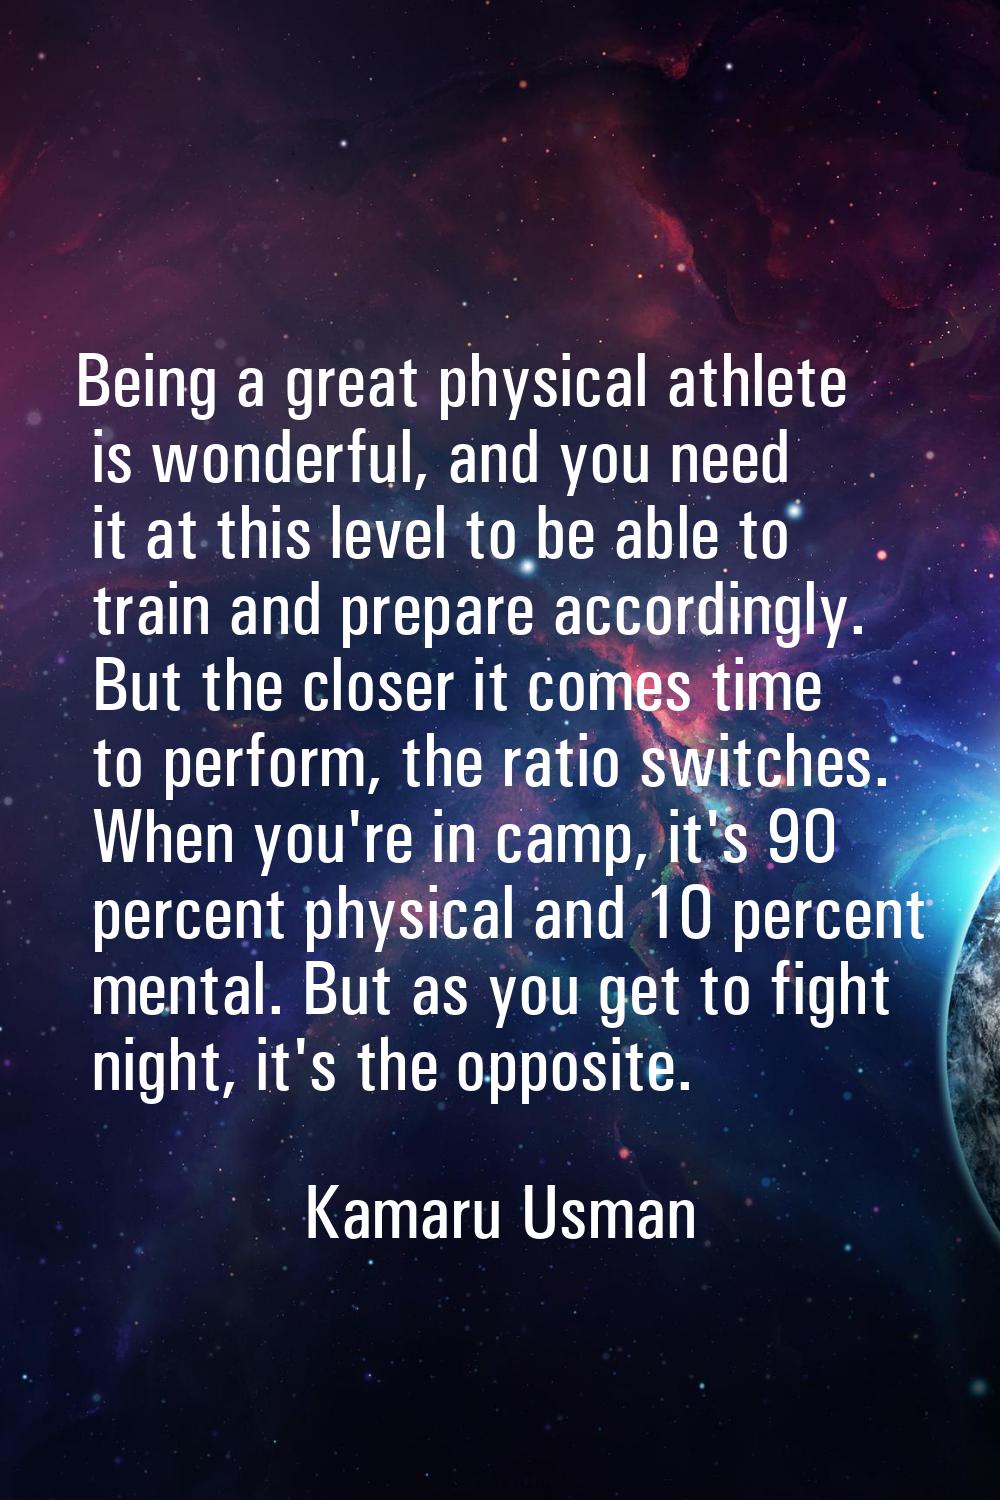 Being a great physical athlete is wonderful, and you need it at this level to be able to train and 